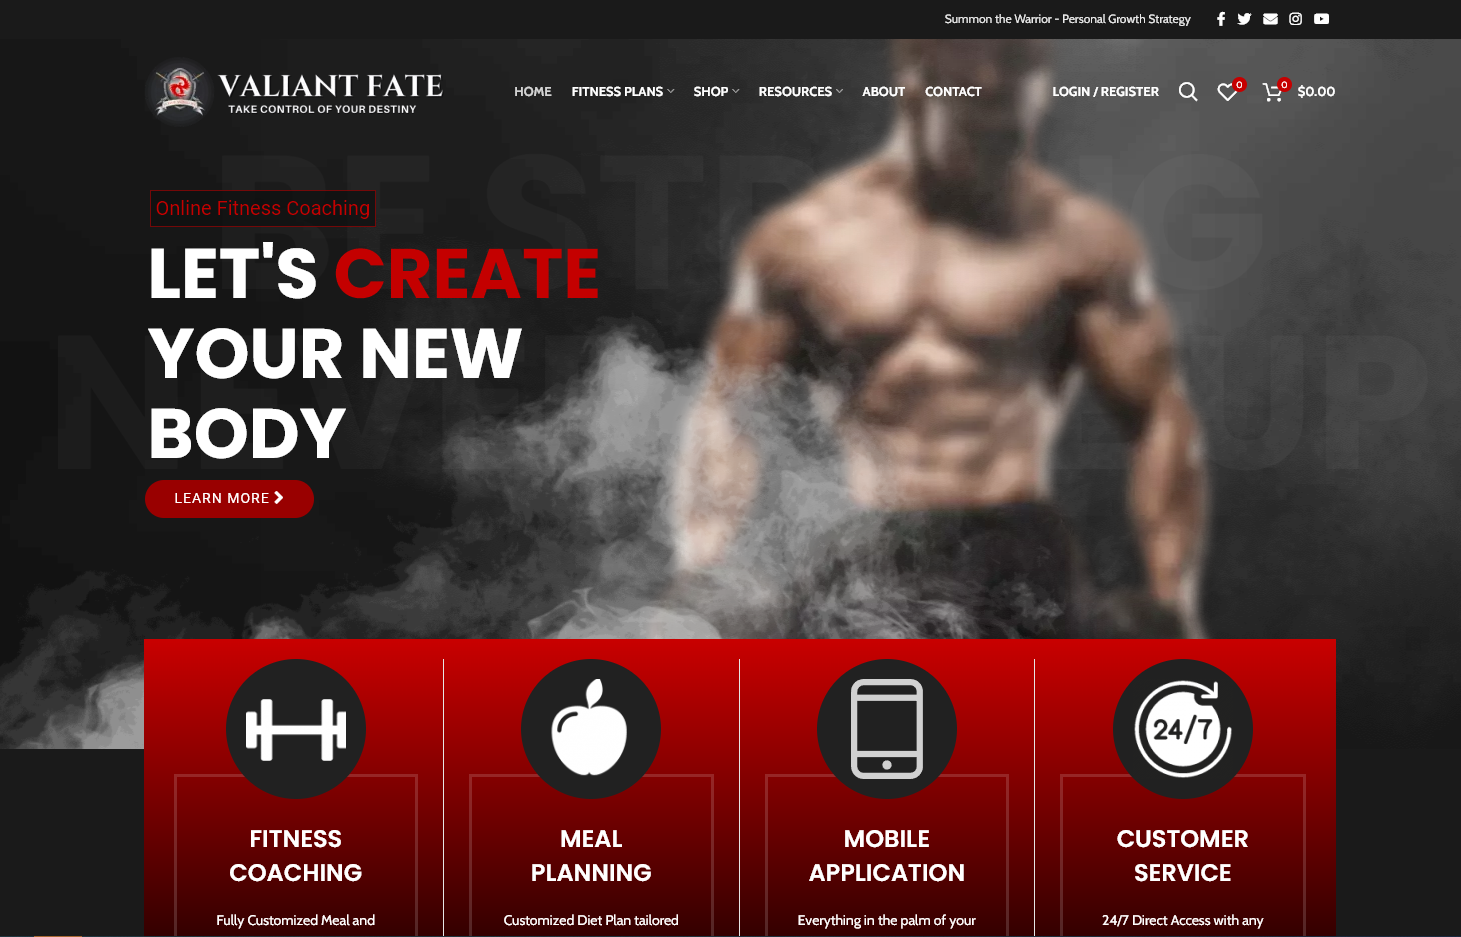 Valiant Fate - Online Fitness Coaching